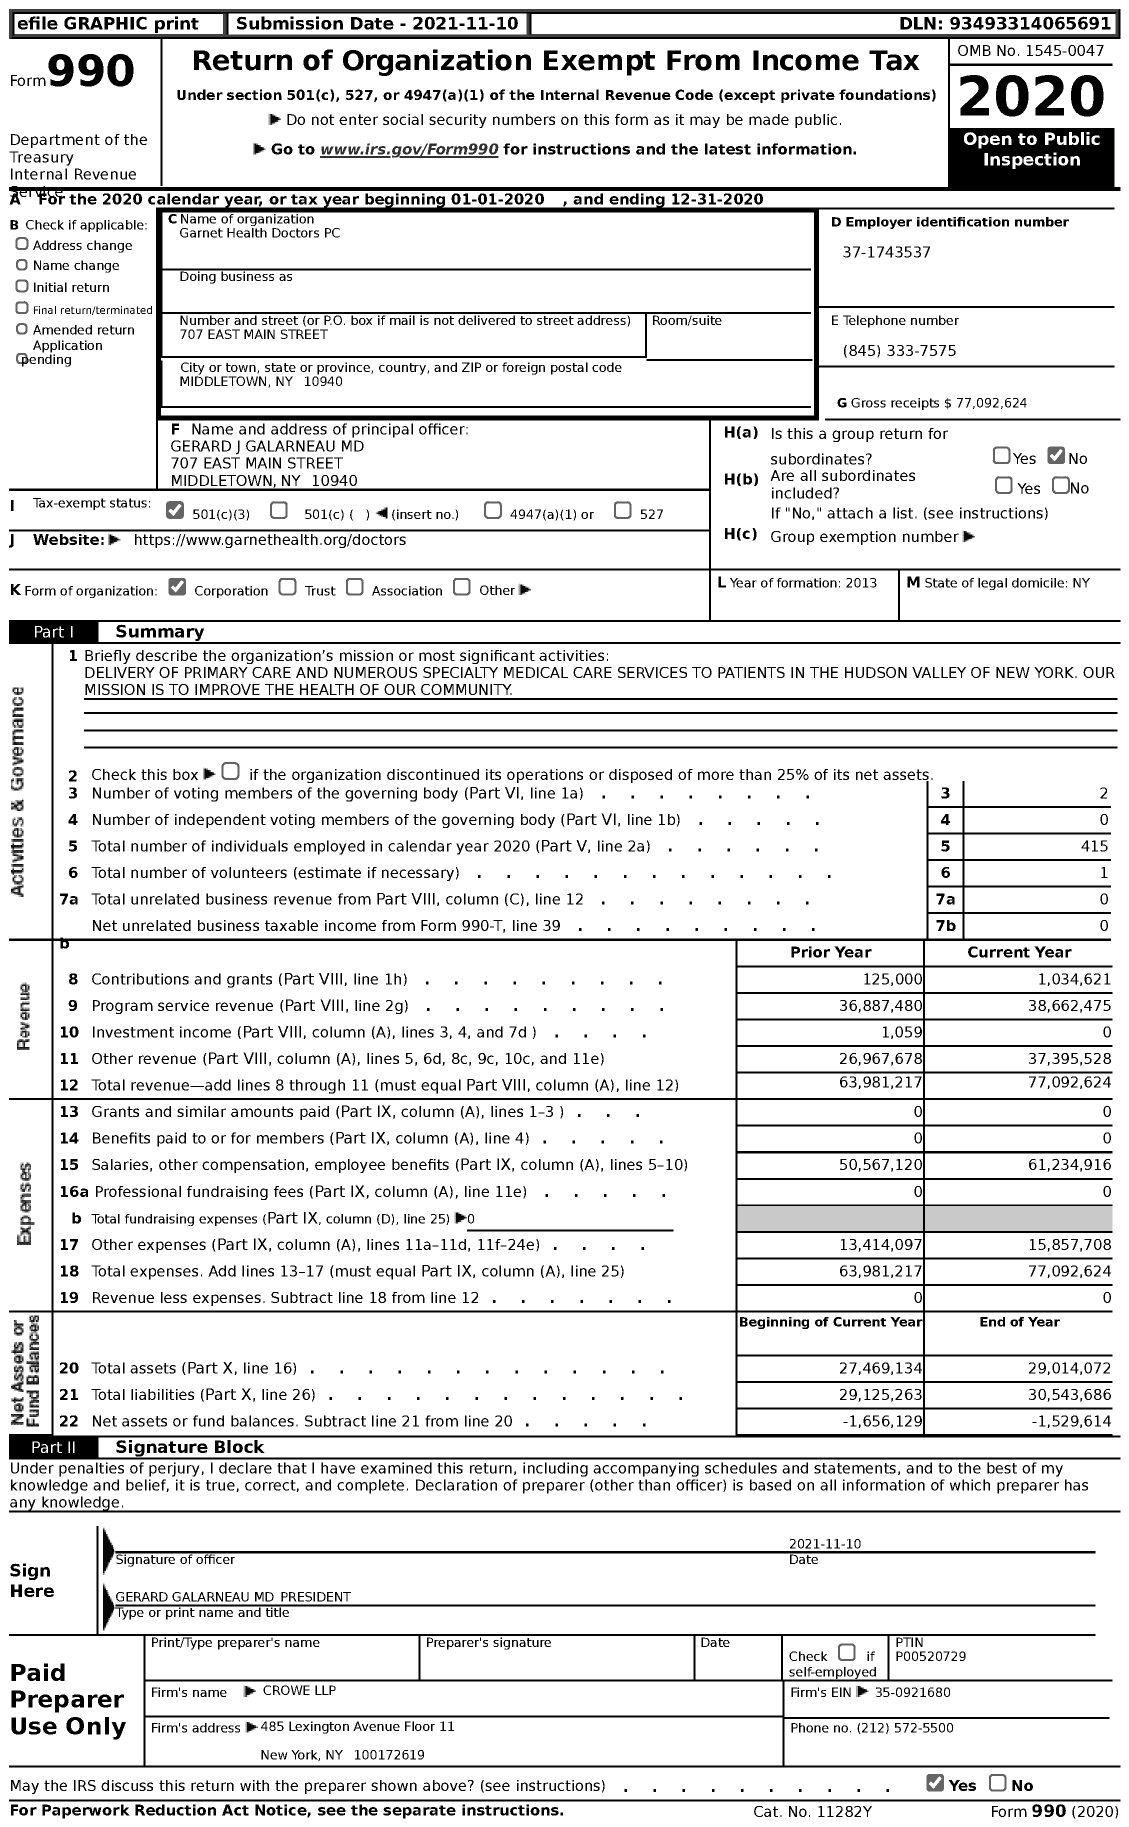 Image of first page of 2020 Form 990 for Garnet Health Doctors PC (GHVHS)